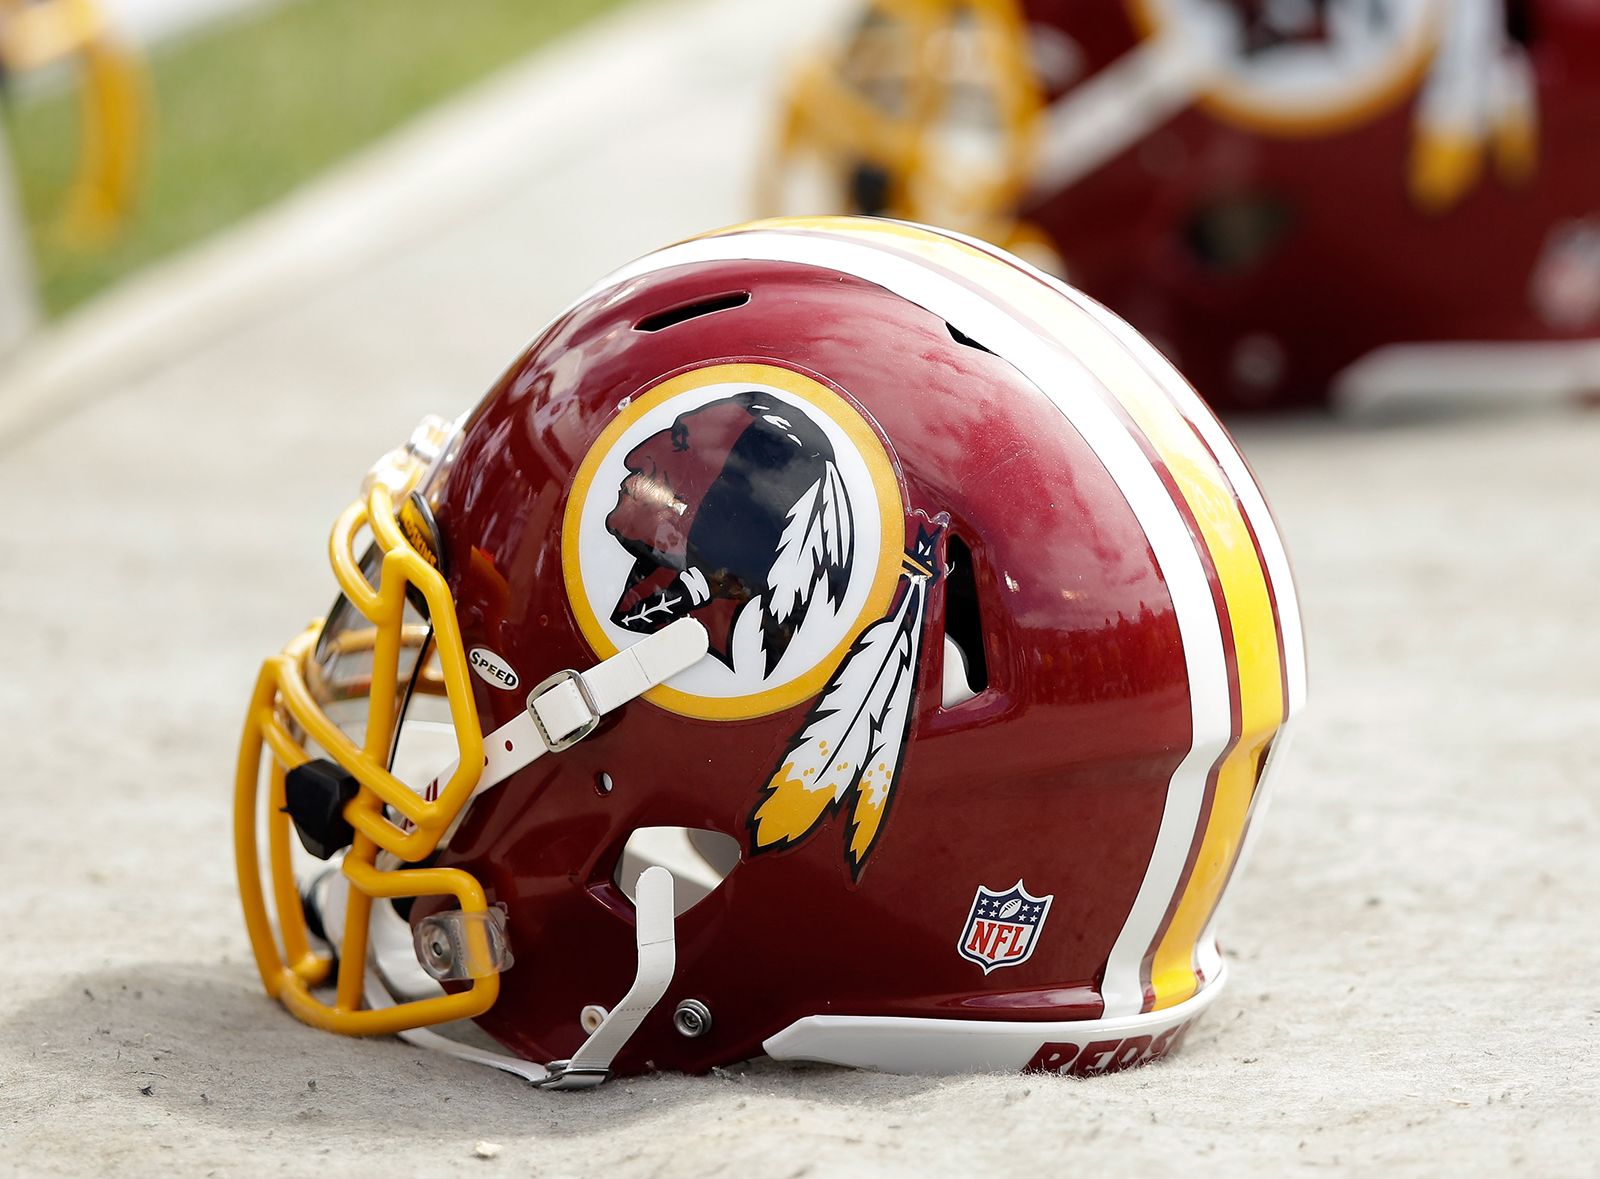 Redskins, Indians and the Long Push to Drop Native American